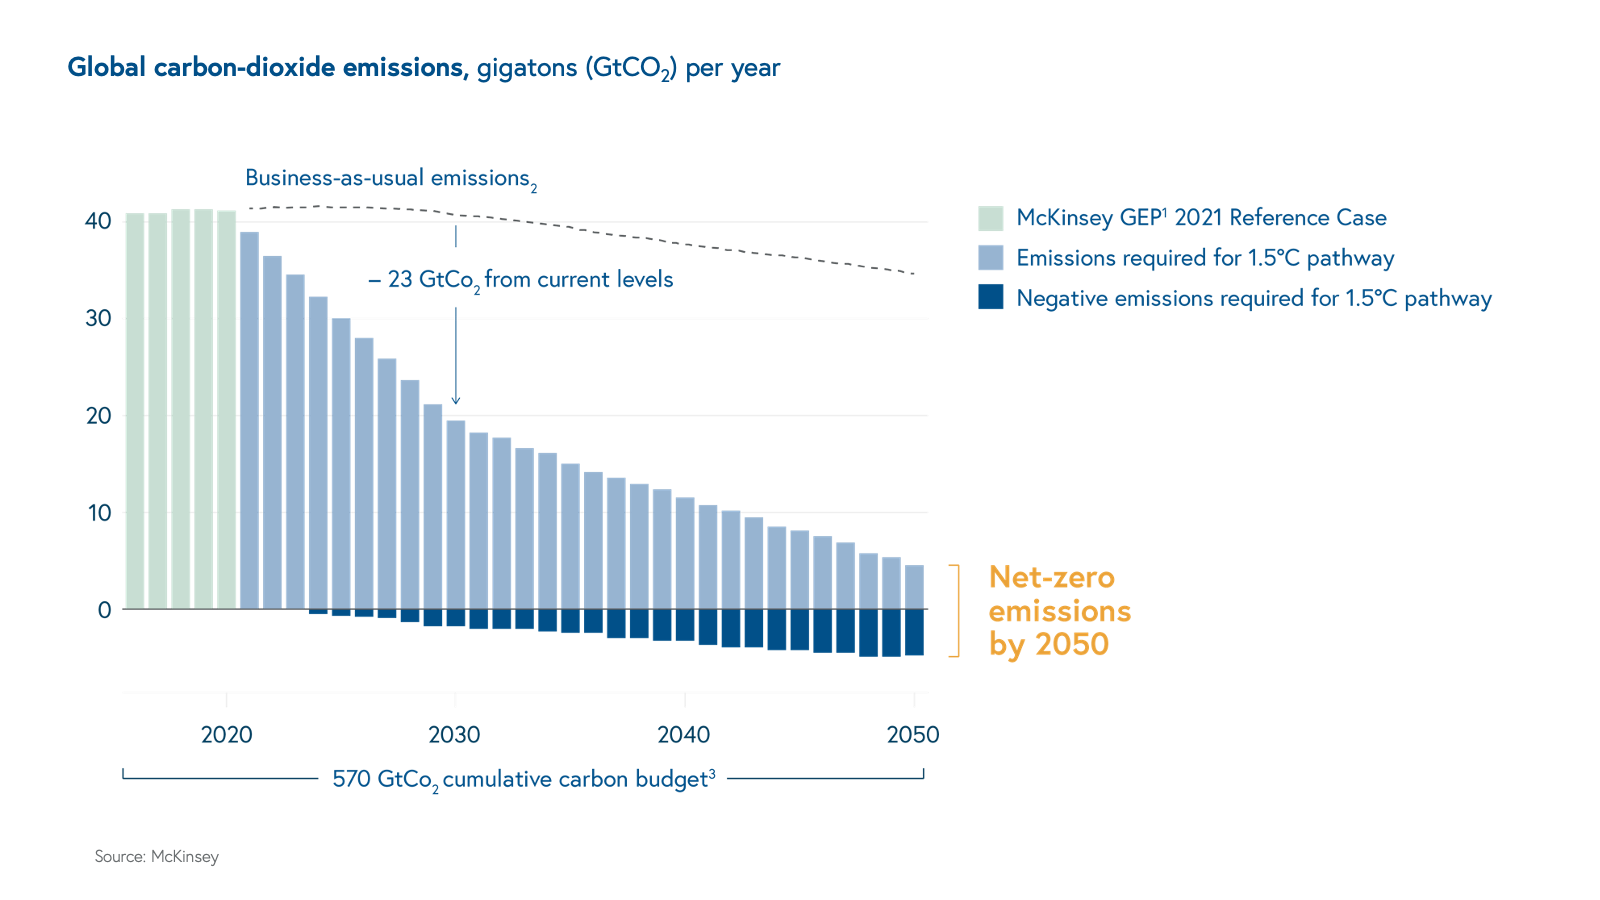 Global carbon-dioxide emissions, gigatons (GtCO2) per year